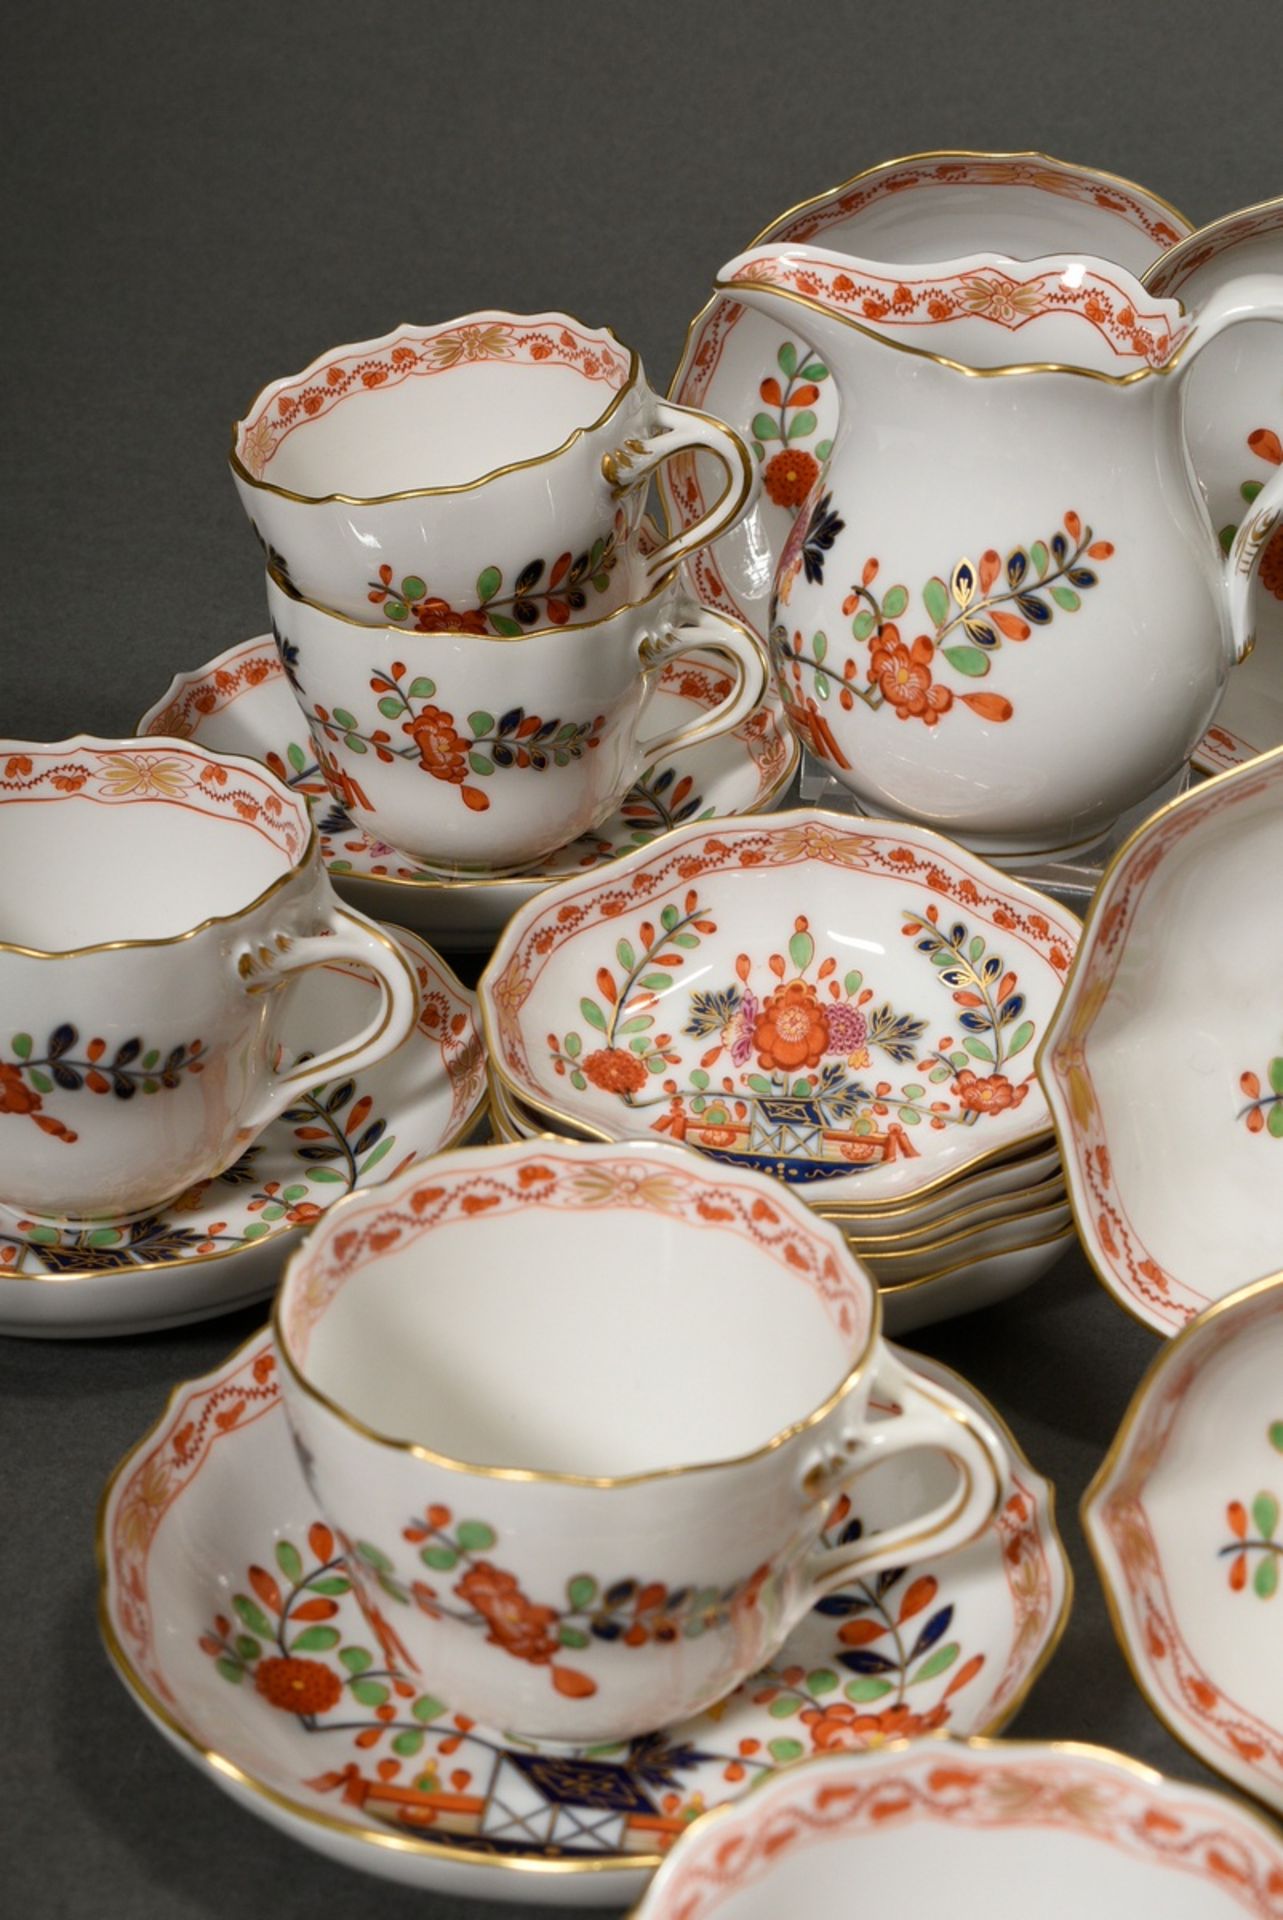 26 Pieces Meissen mocha service "Tischchenmuster" with gold staffage for 10 people, 20th c., consis - Image 4 of 6